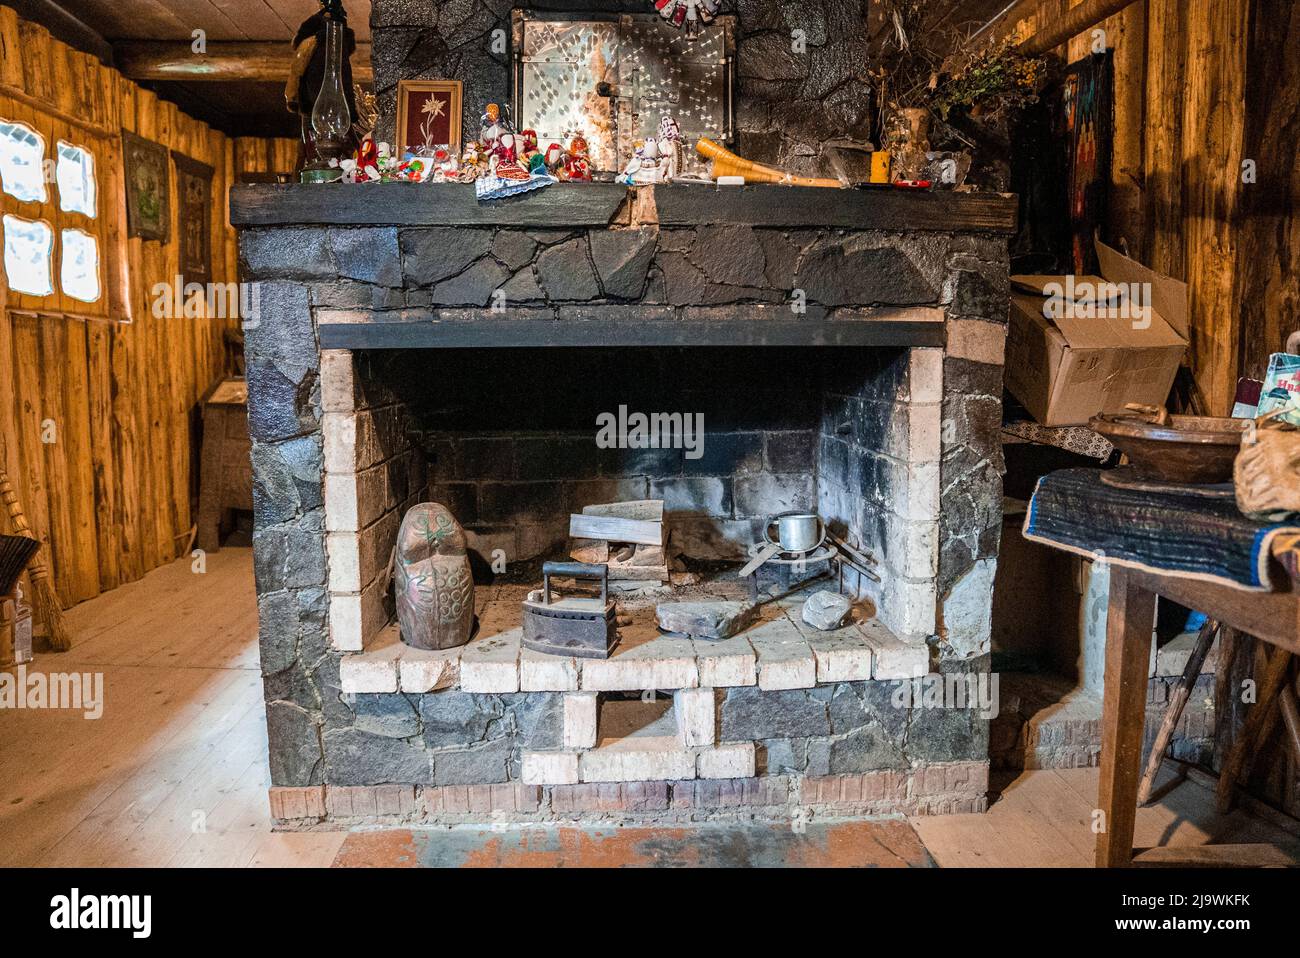 Stone brick wall fireplace with antique tools in abandoned room Stock Photo